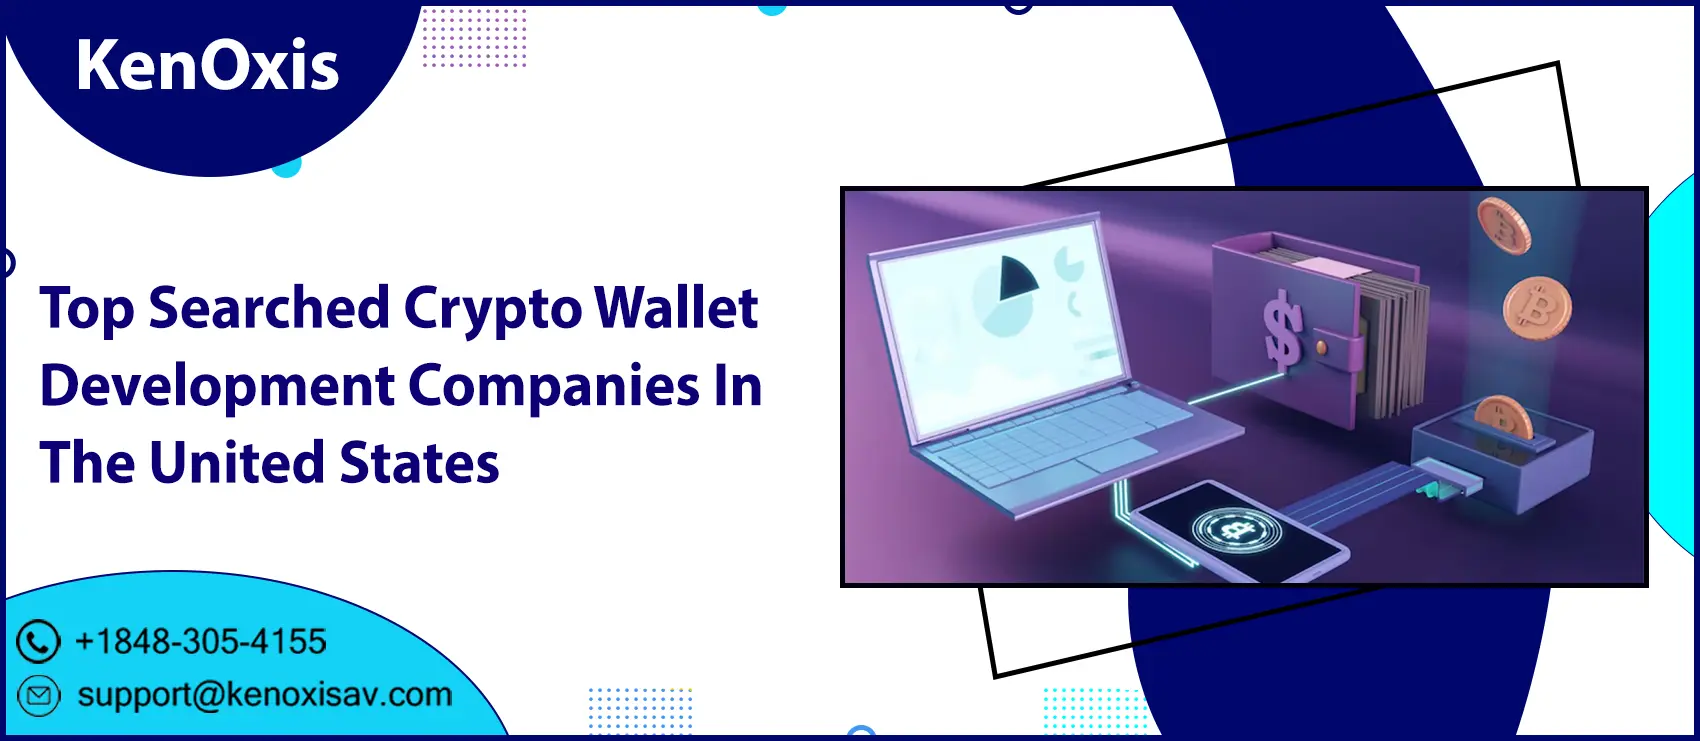 Top Searched Crypto Wallet Development Companies In The United States